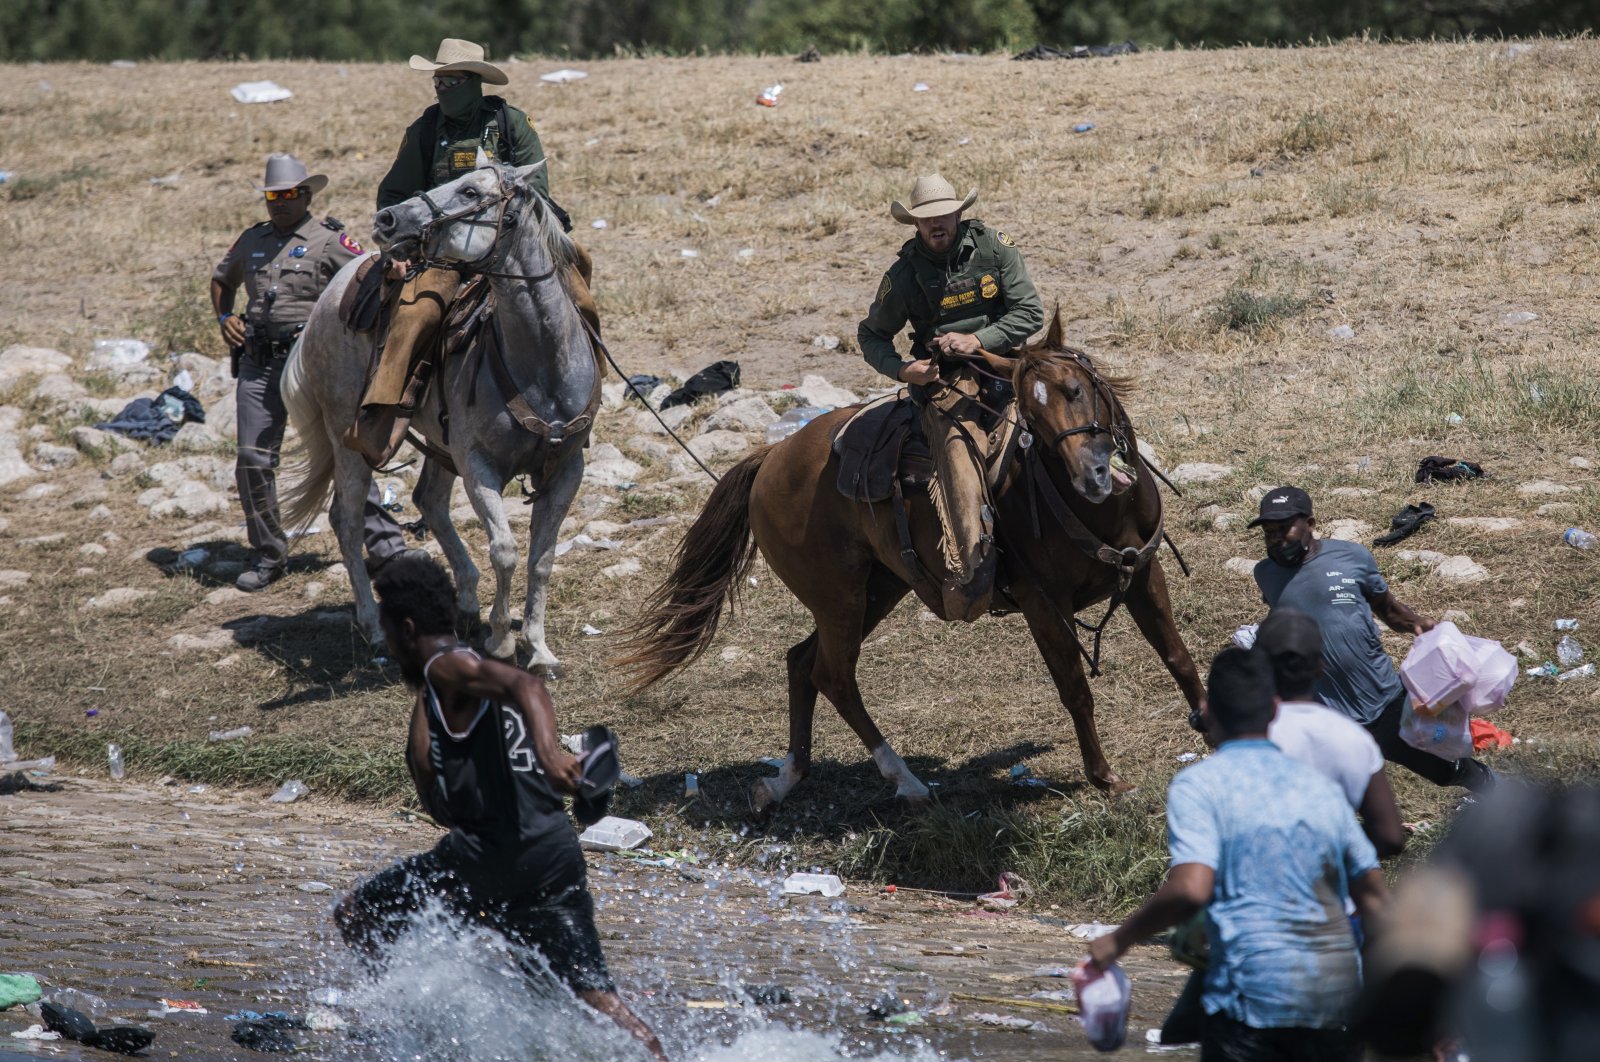 U.S. Customs and Border Protection mounted officers attempt to contain migrants as they cross the Rio Grande from Ciudad Acuna, Mexico, into Del Rio, Texas, U.S., Sept. 19, 2021. (AP Photo)